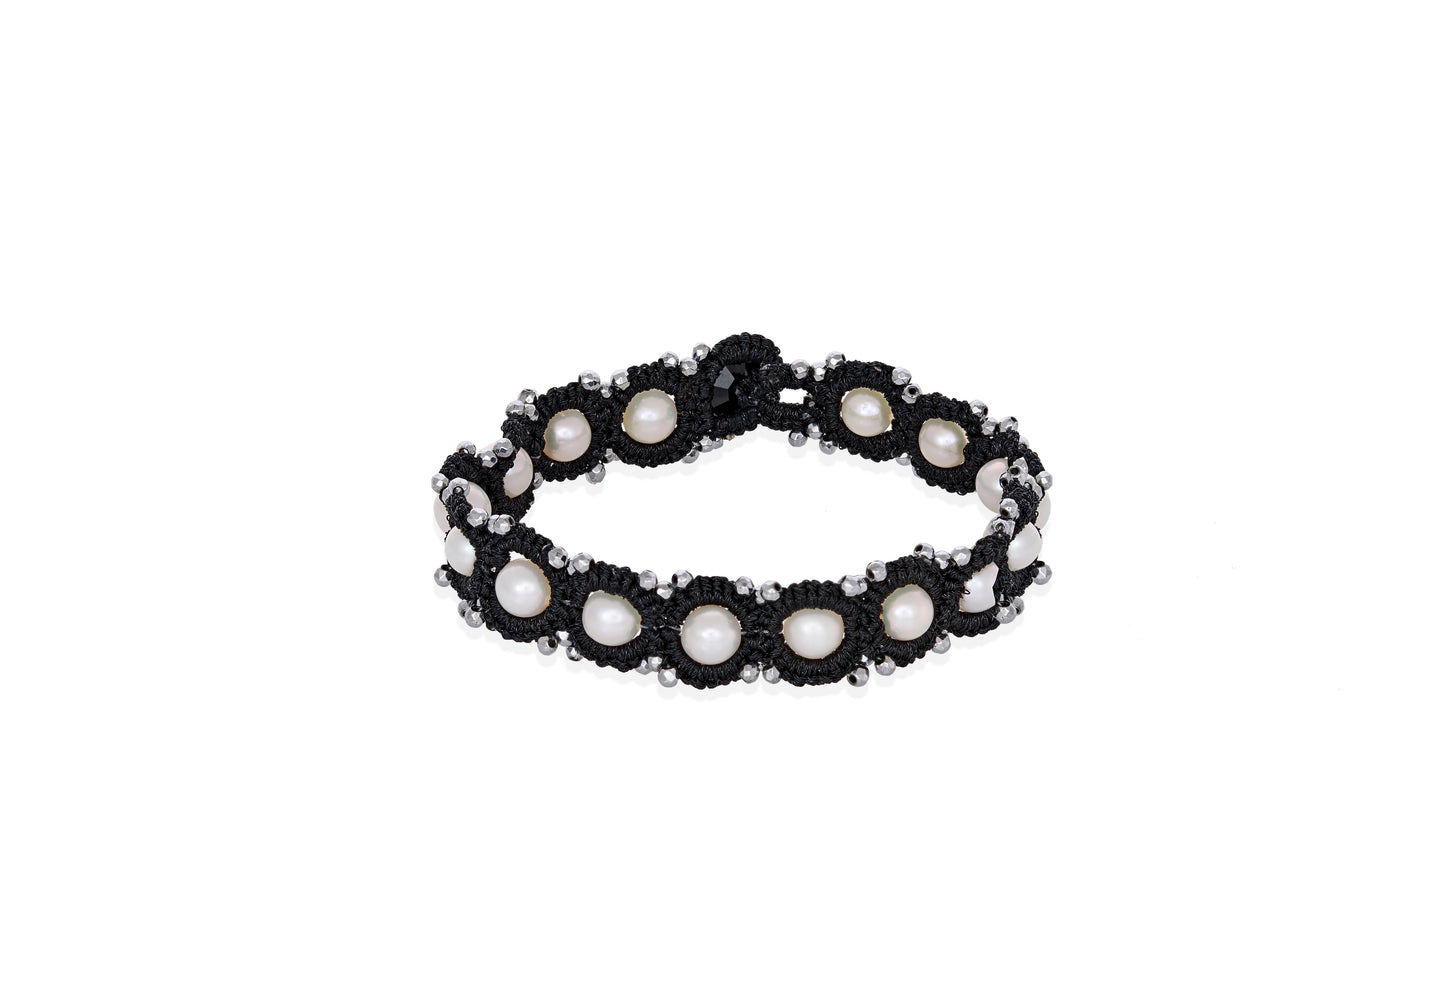 Chic lace bracelet, fresh water pearls